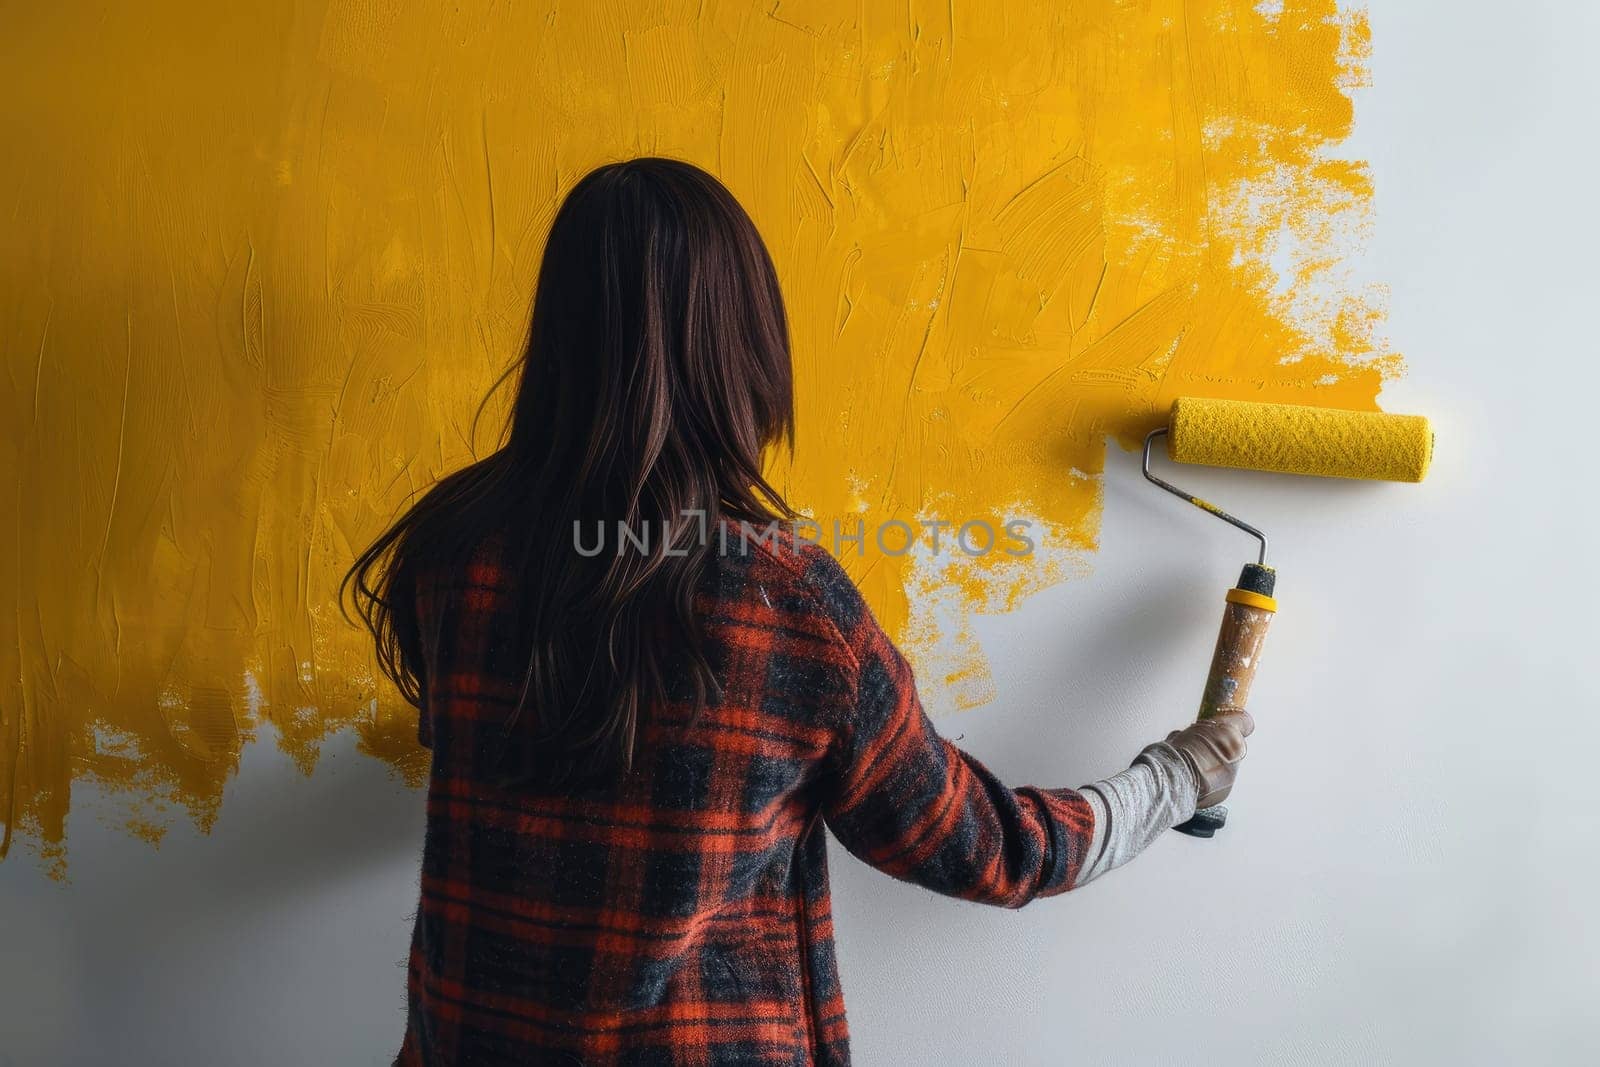 Painting the wall by a young woman with a paint roller